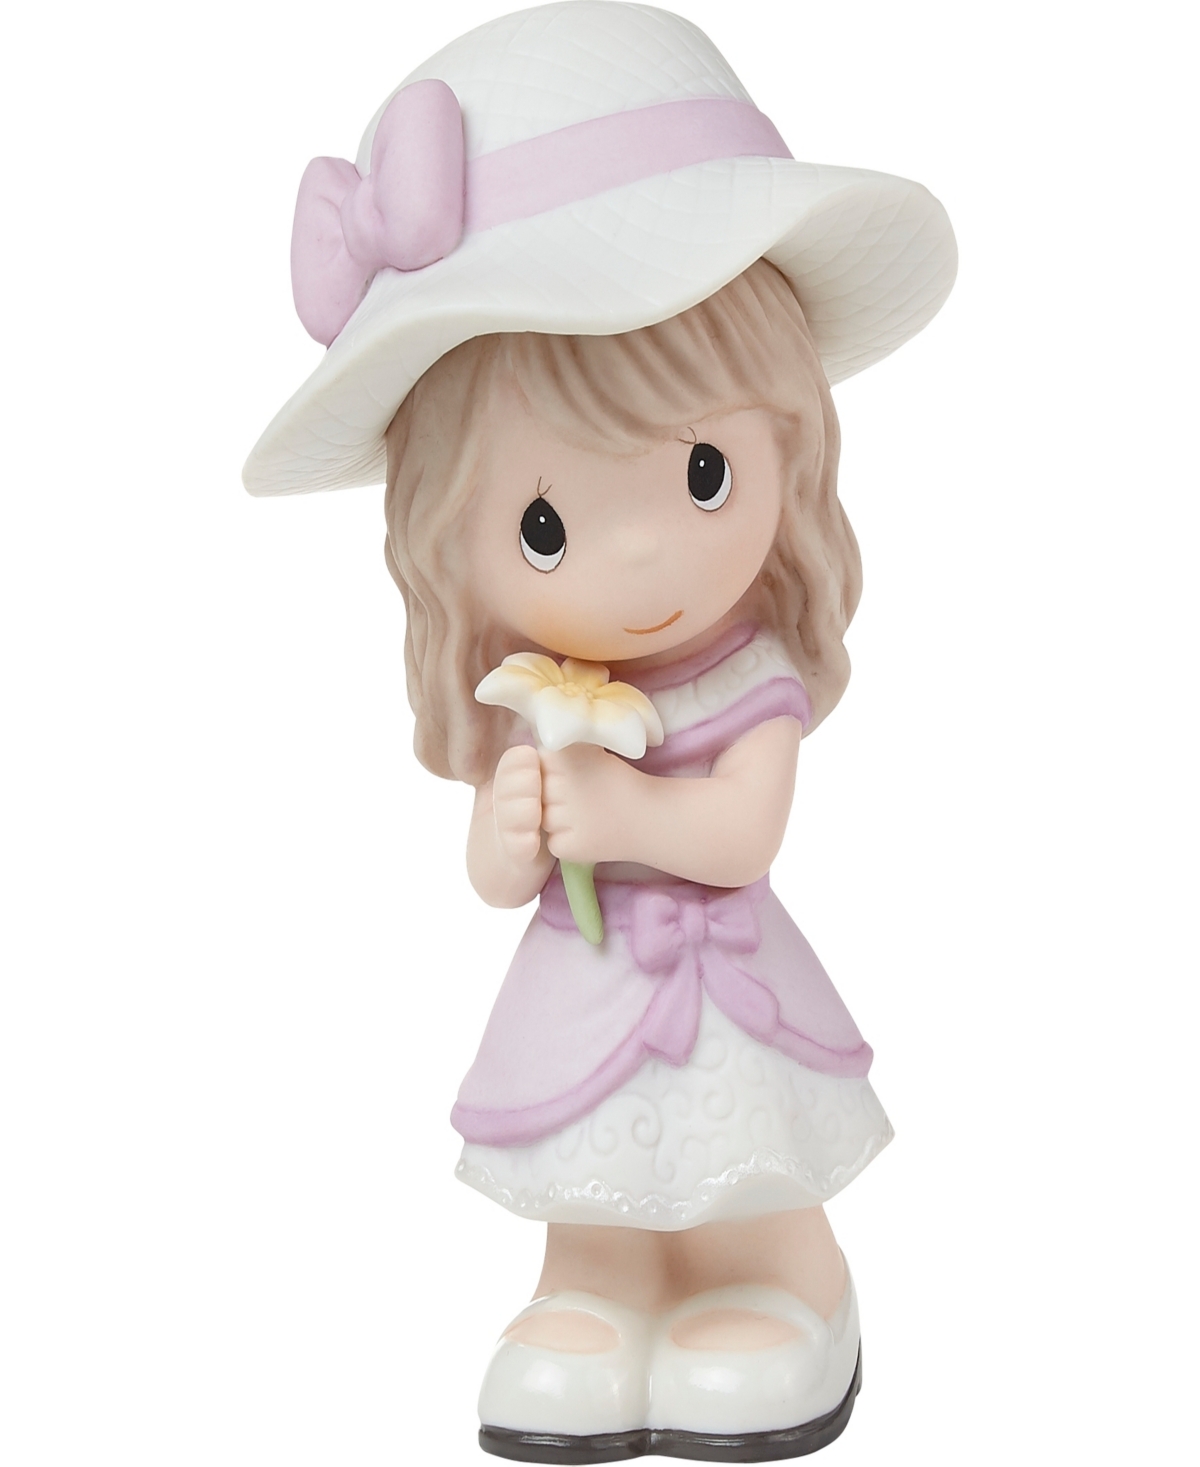 Precious Moments 222020 Rejoice In His Blessings Bisque Porcelain Figurine In Multicolored